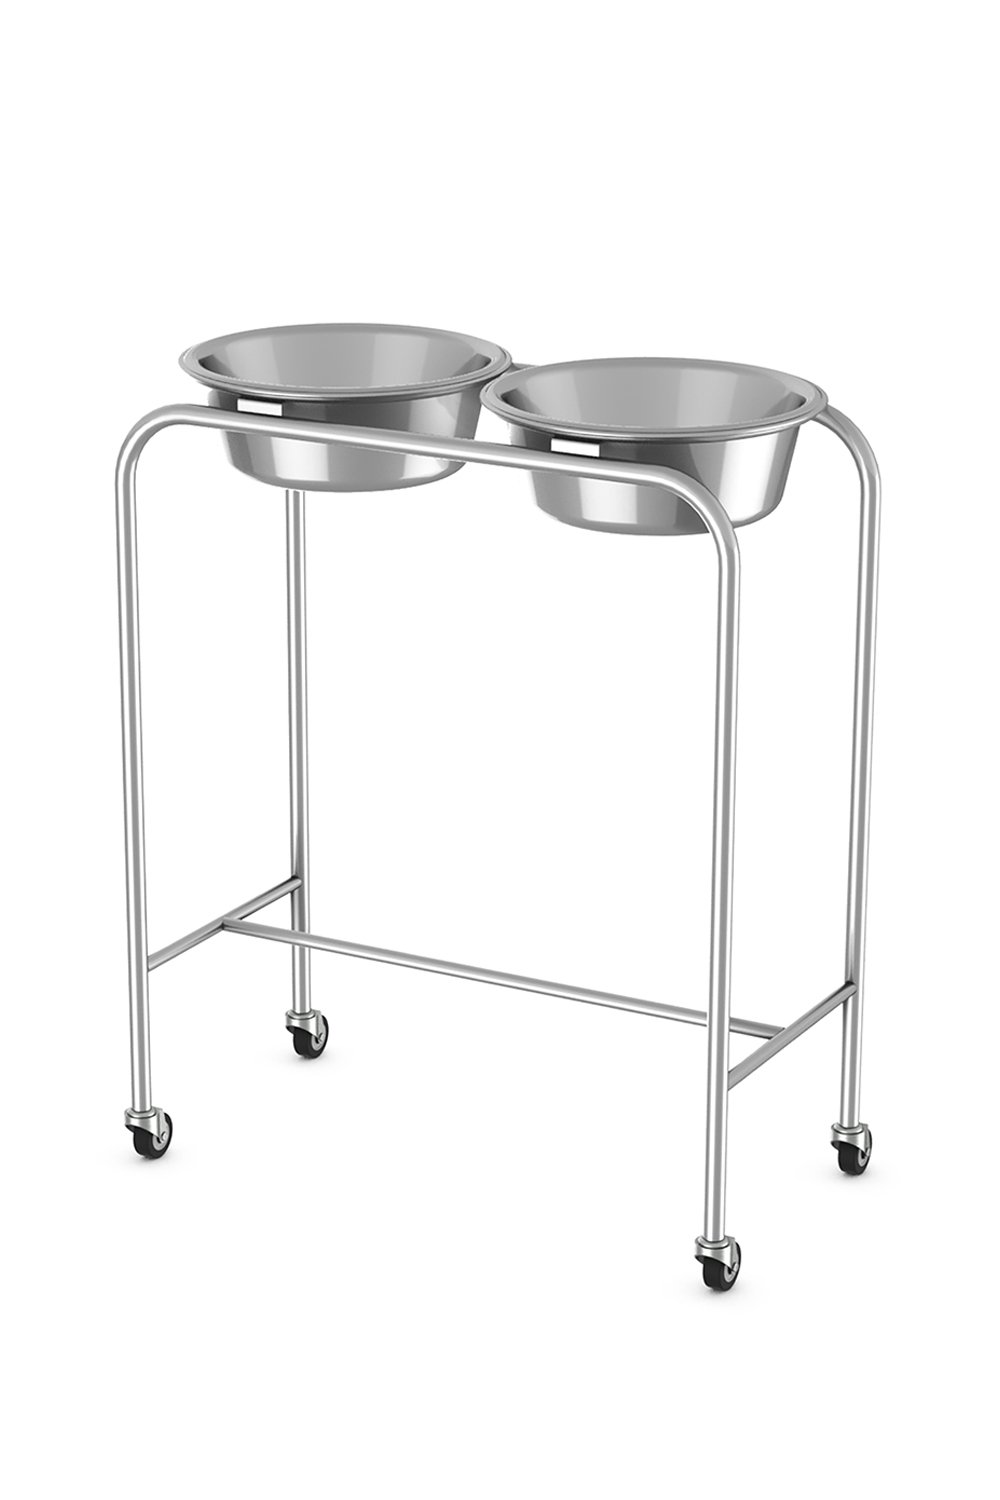 Solution Stand Stainless Solutions Acart 28"D x 14"W x 34"H 7 Quart Basins (2) with H Brace 